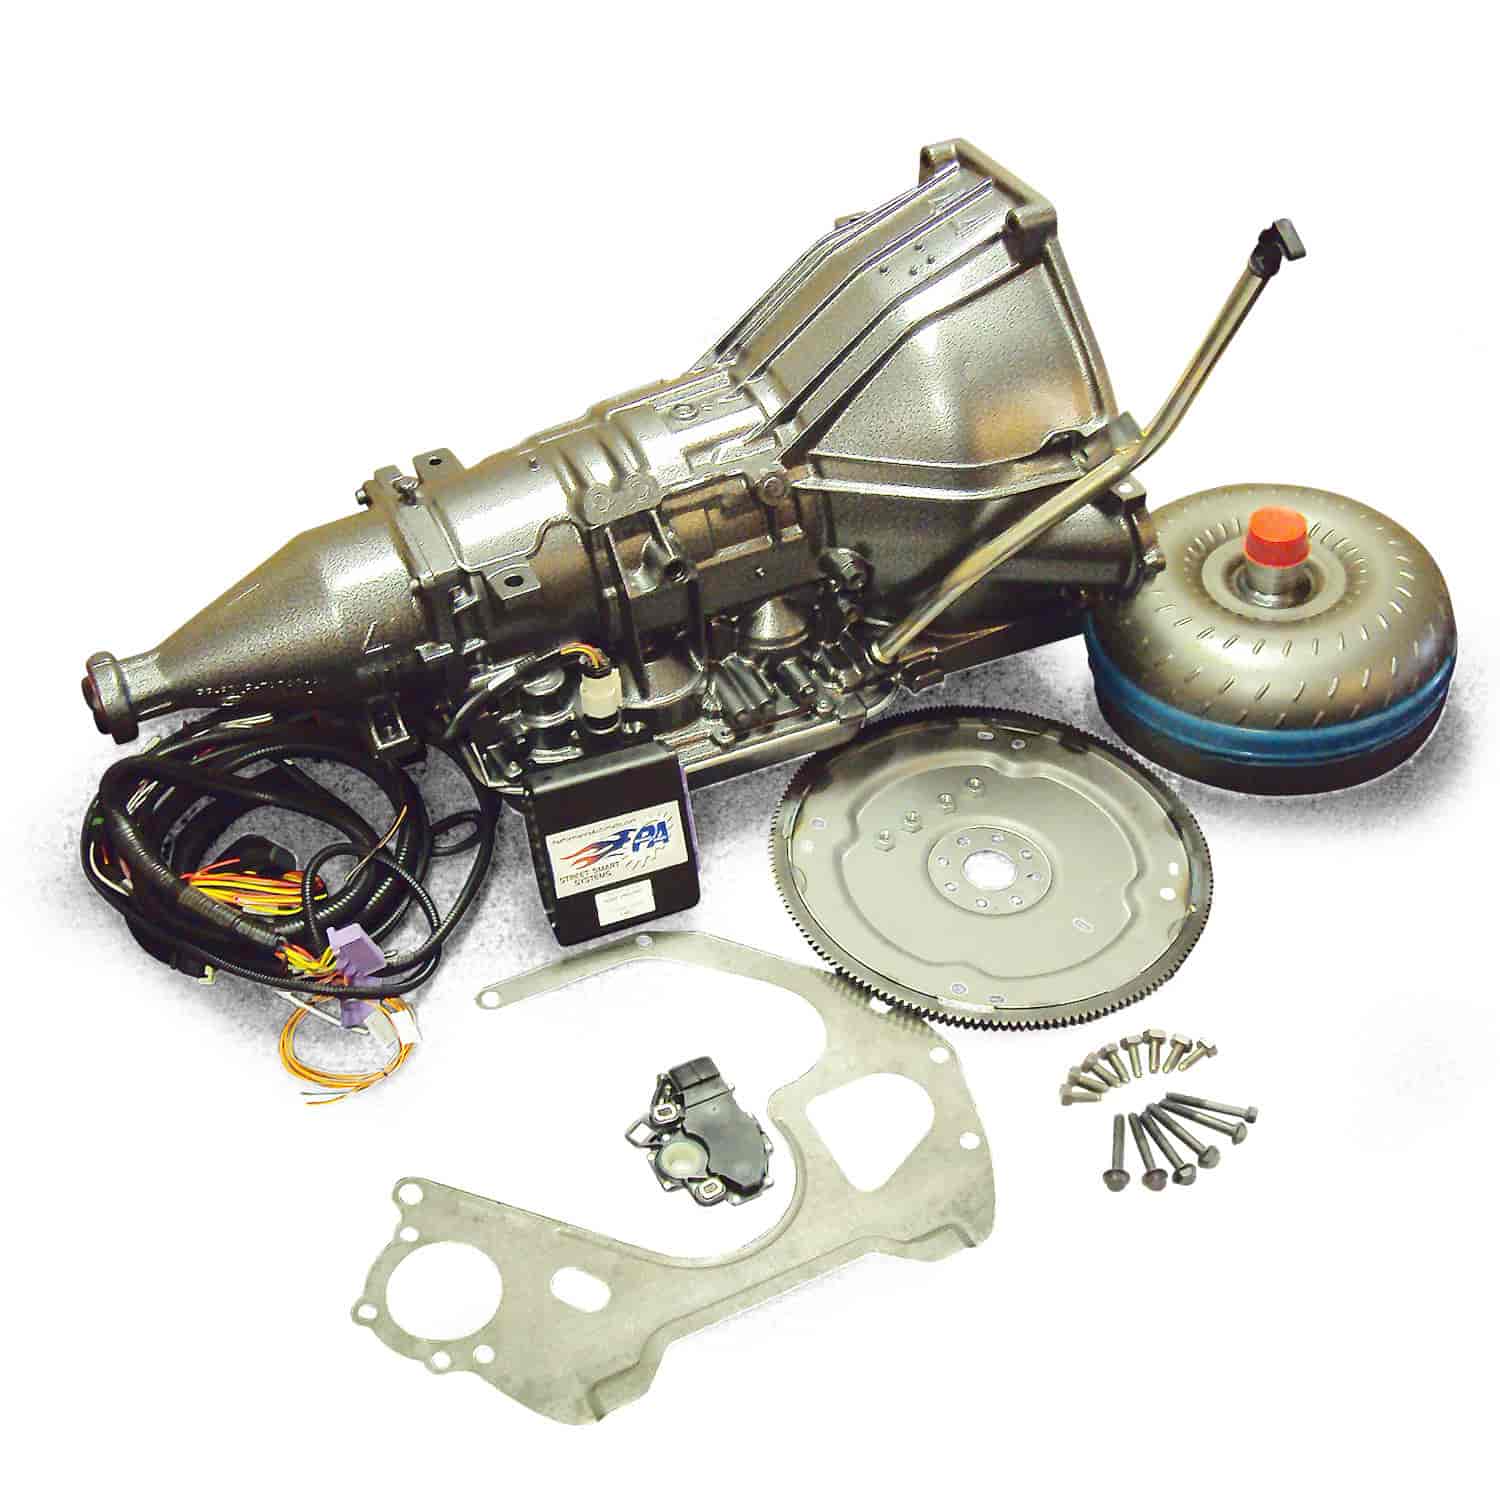 Blue Chip Street Smart 4R70W Transmission Package for